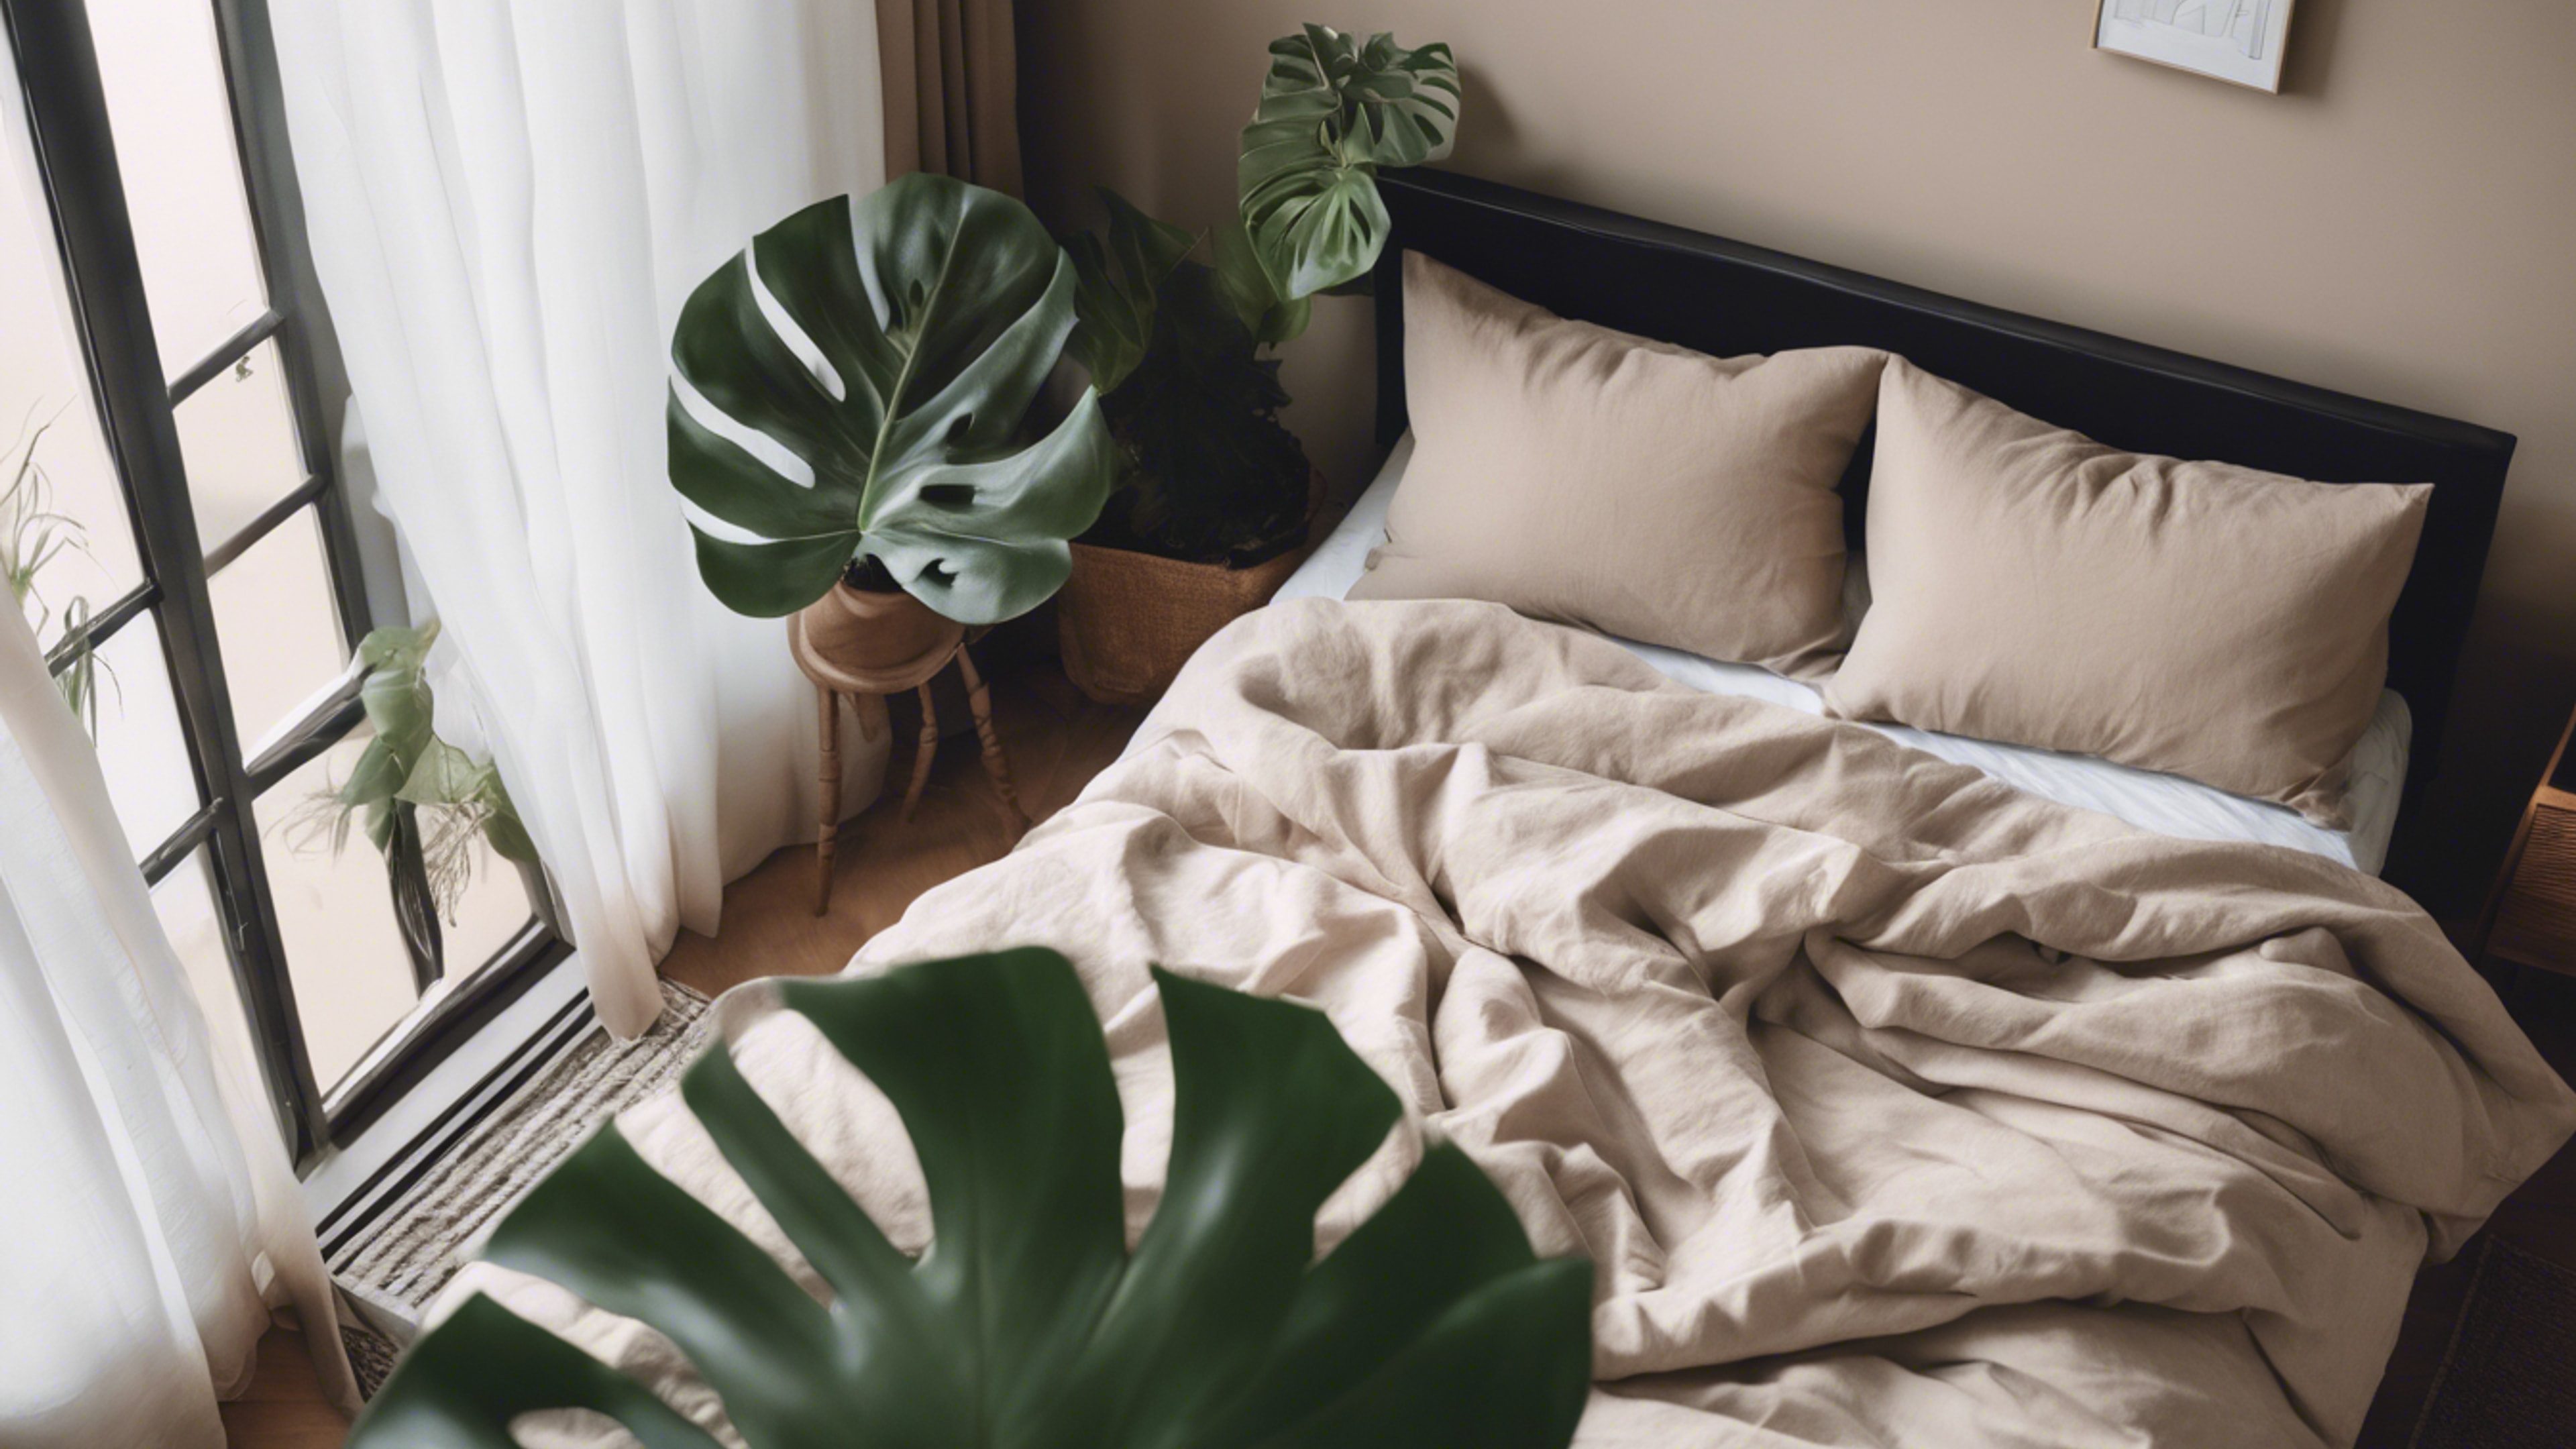 An overhead shot of a simple, cozy bedroom decorated with neutral linens and a single indoor monstera plant. Валлпапер[3343a08d4a5644ae8972]